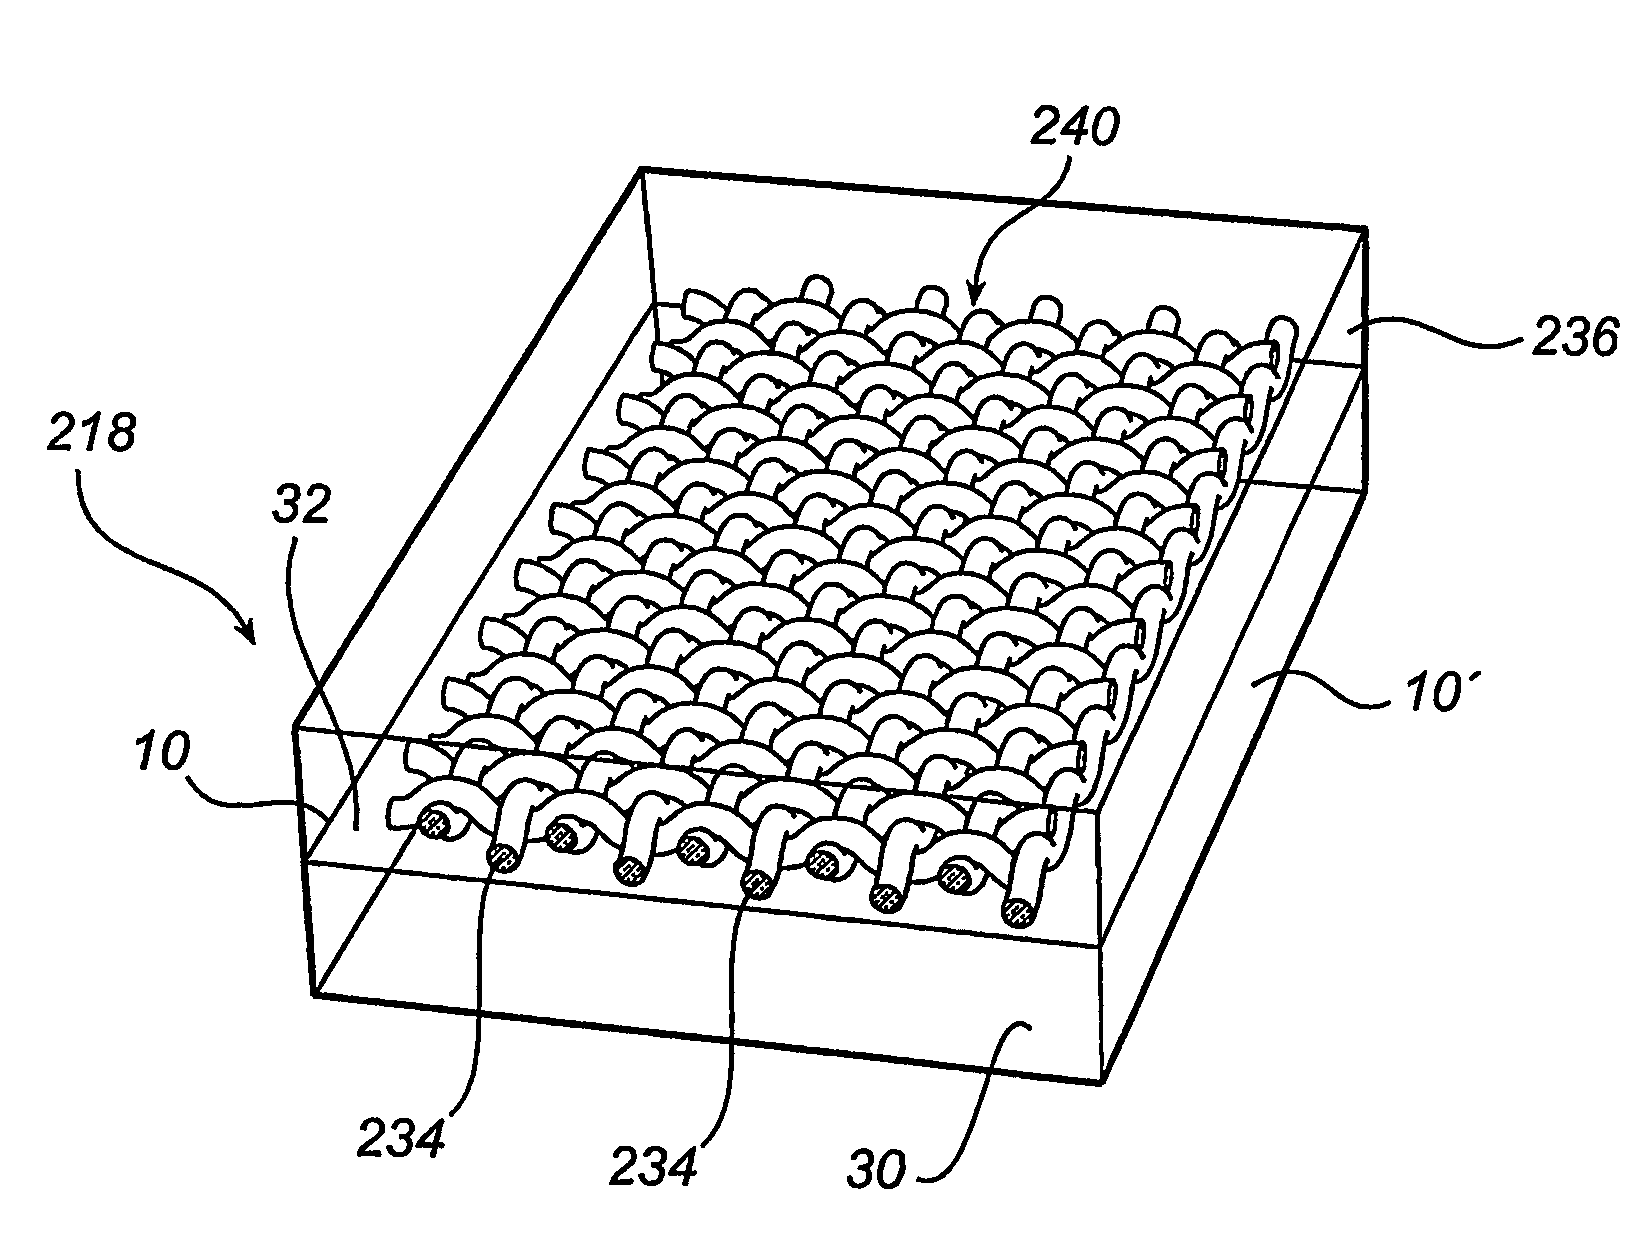 Display illumination system and manufacturing method thereof